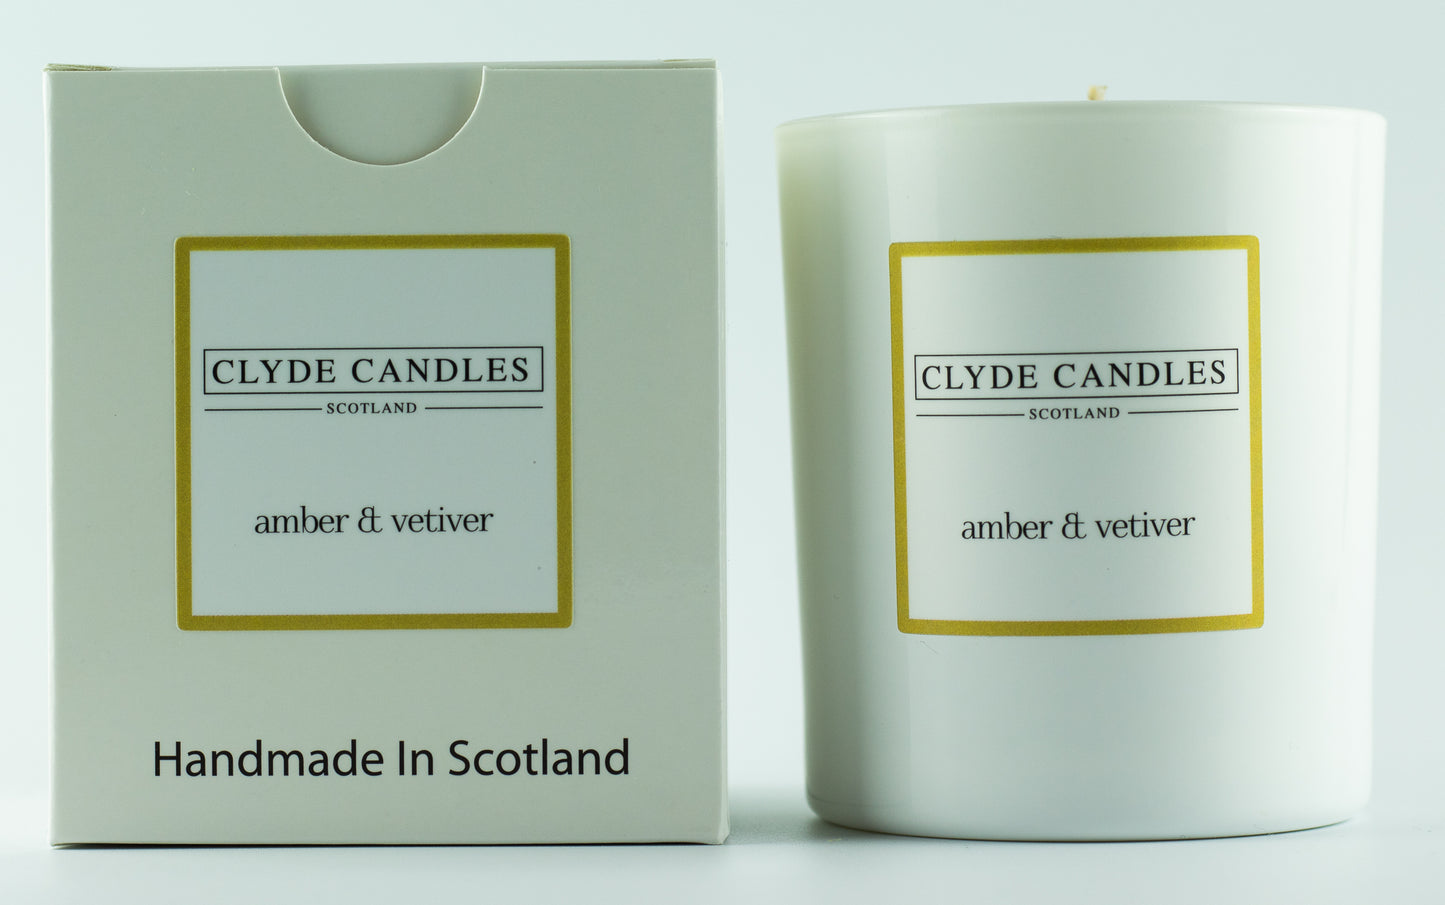 Amber & Vetiver Gift Box Candle - Large Glass Natural Soy wax, Scottish Candles, Clyde Candles, luxury scottish gifts for her